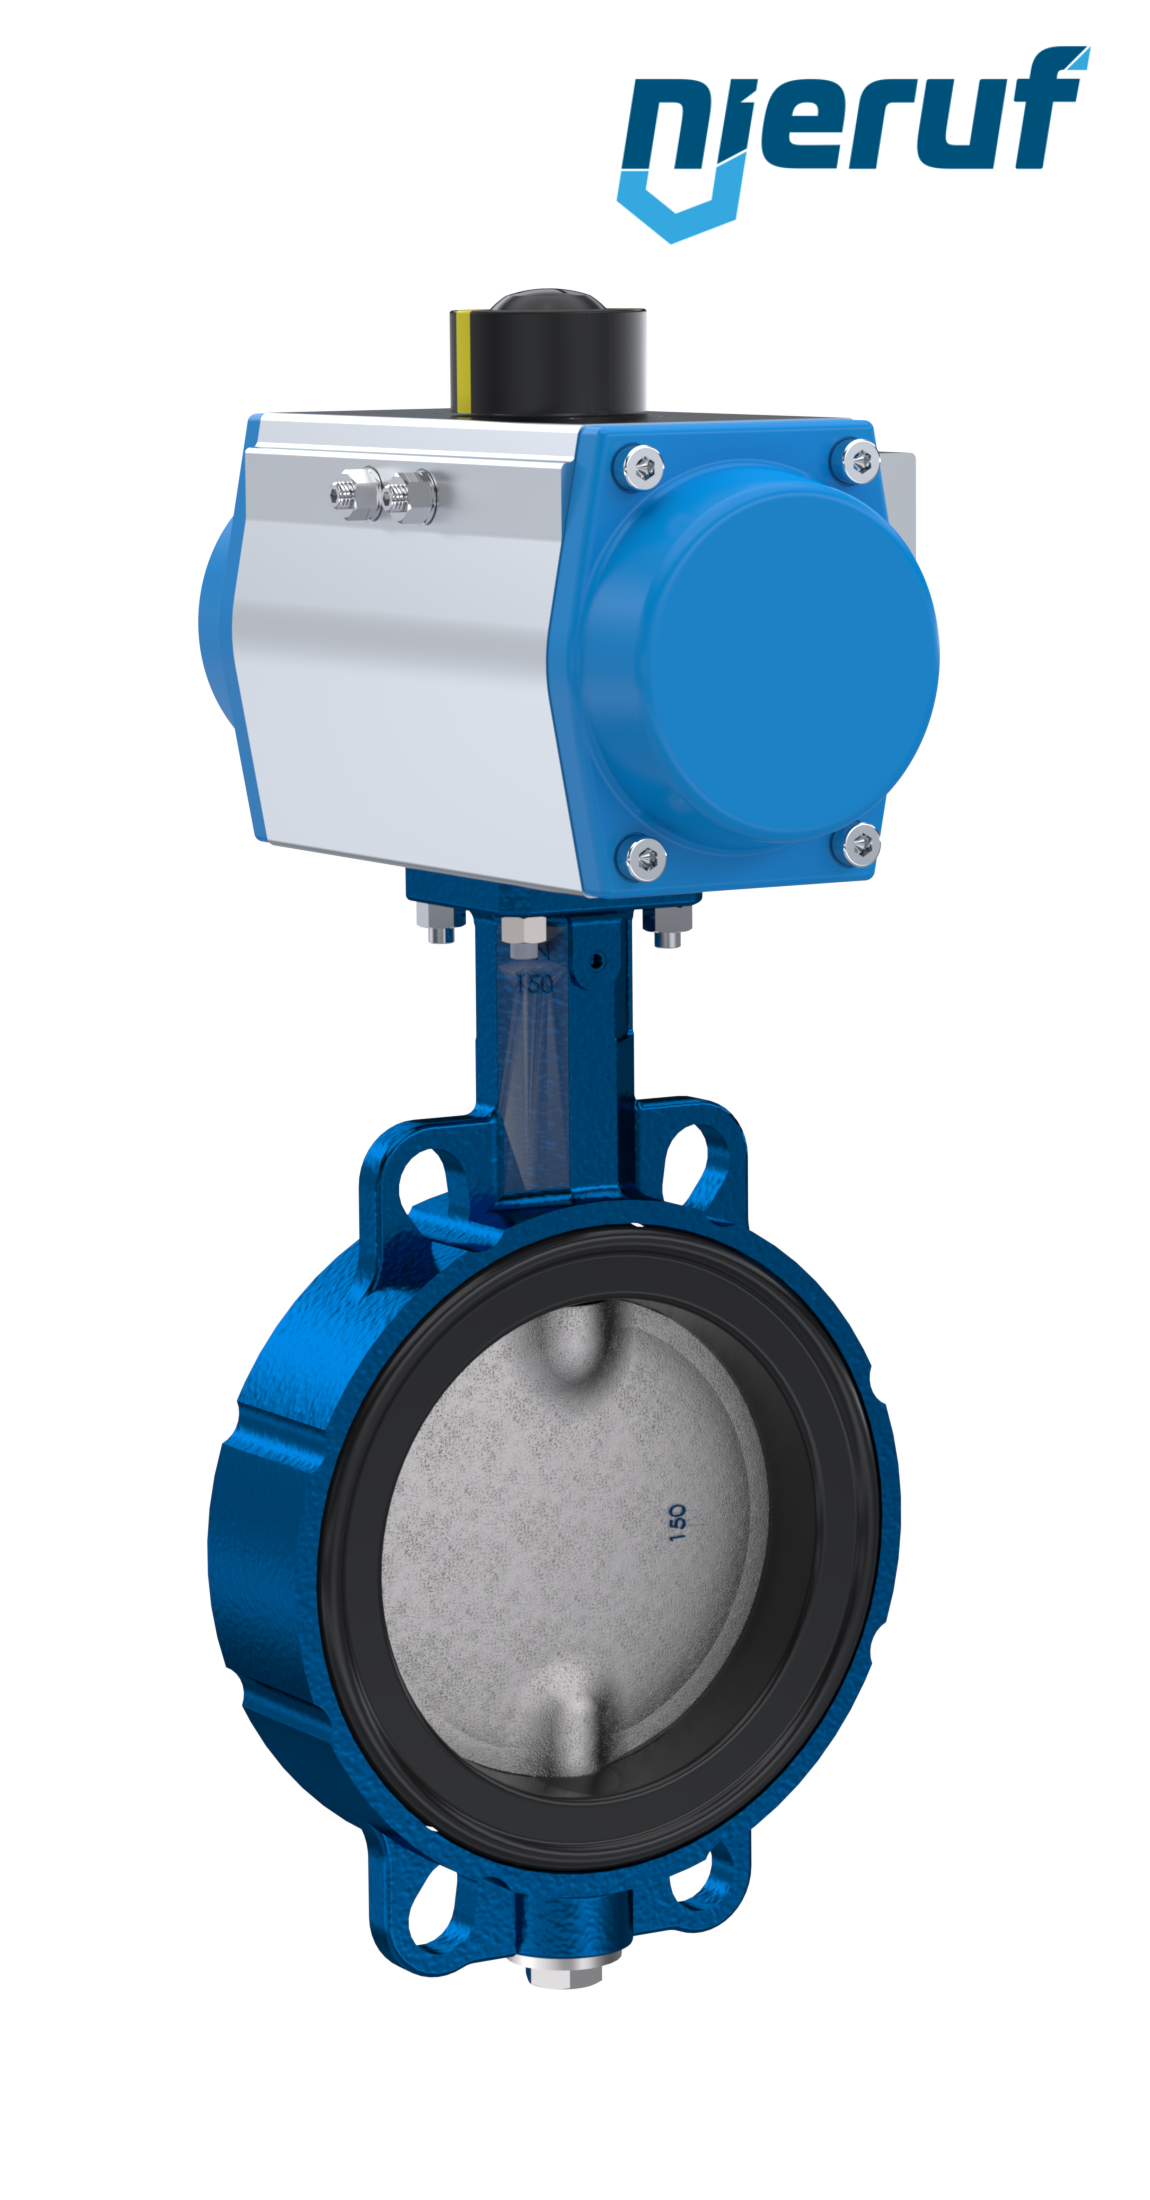 Butterfly valve DN 200 AK01 EPDM DVGW drinking water, WRAS, ACS, W270 pneumatic actuator double acting